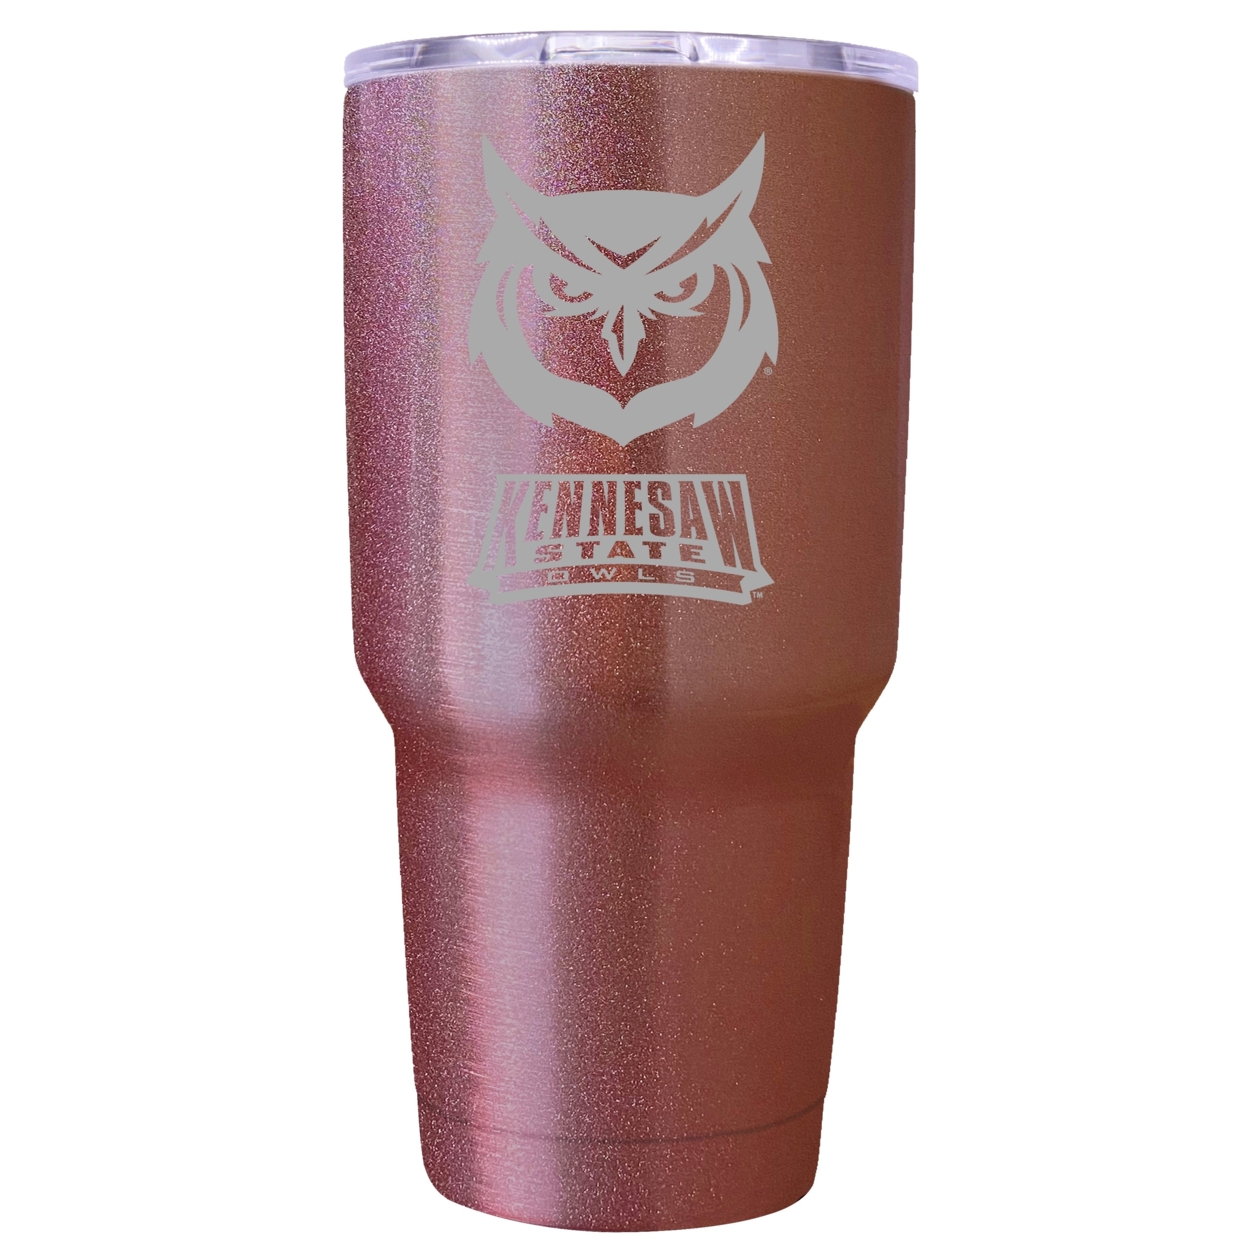 Kennesaw State University 24 Oz Insulated Tumbler Etched - Rose Gold